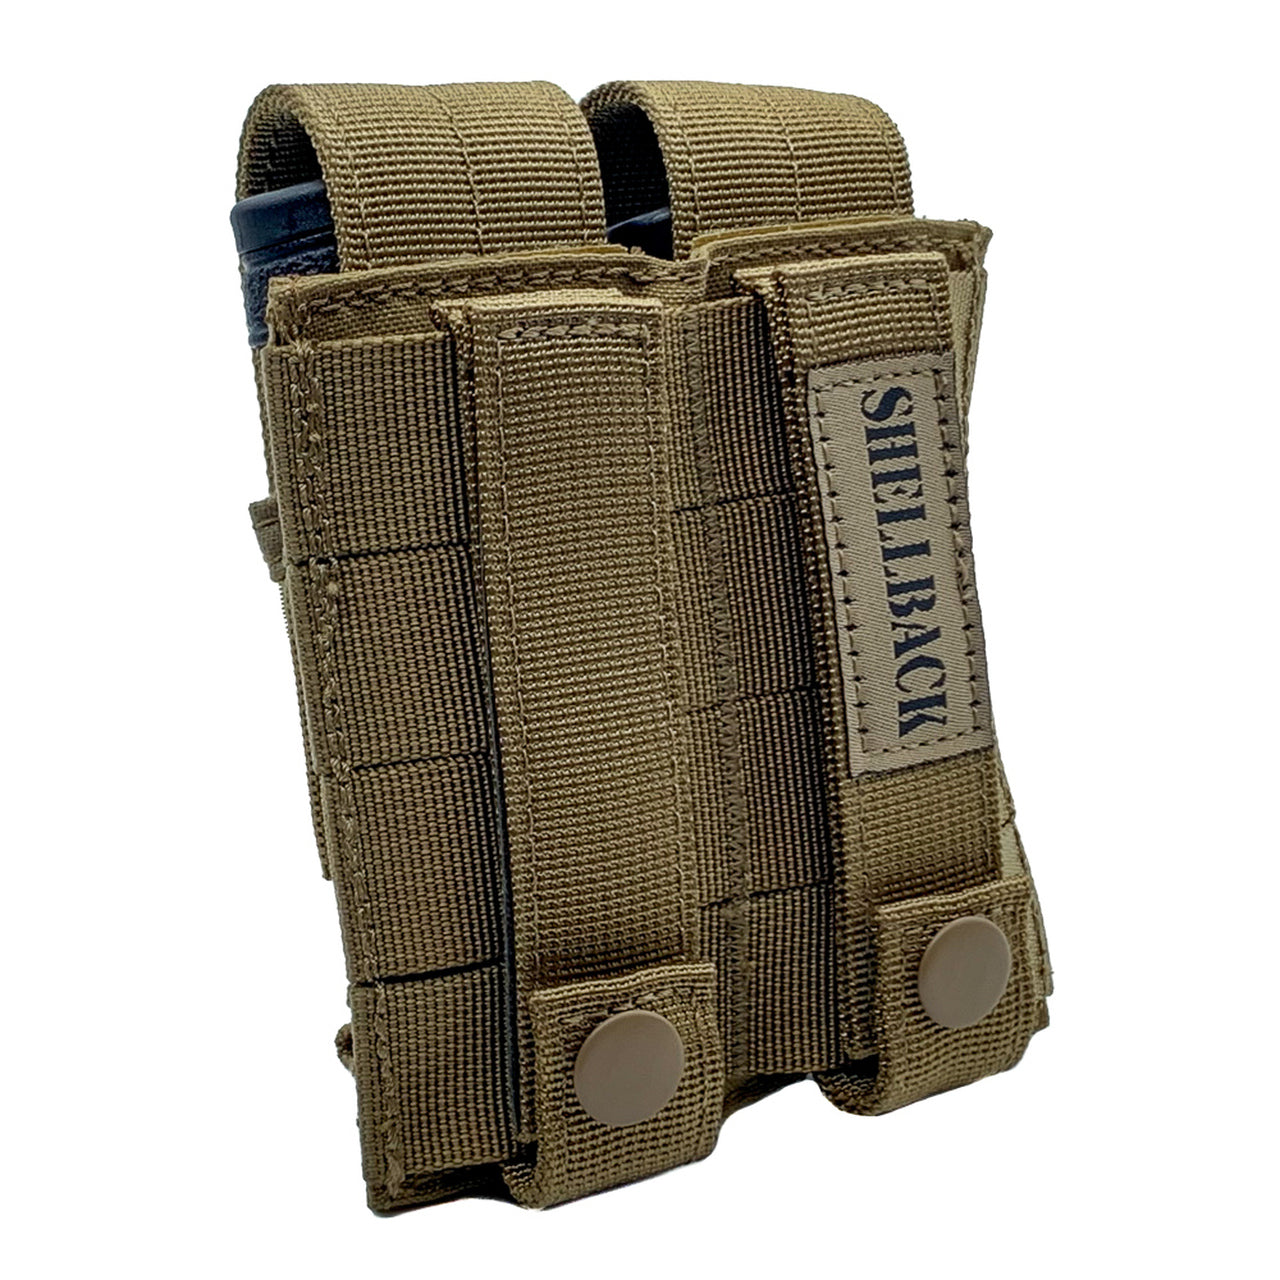 A Shellback Tactical Double Pistol Mag Pouch on a white background.